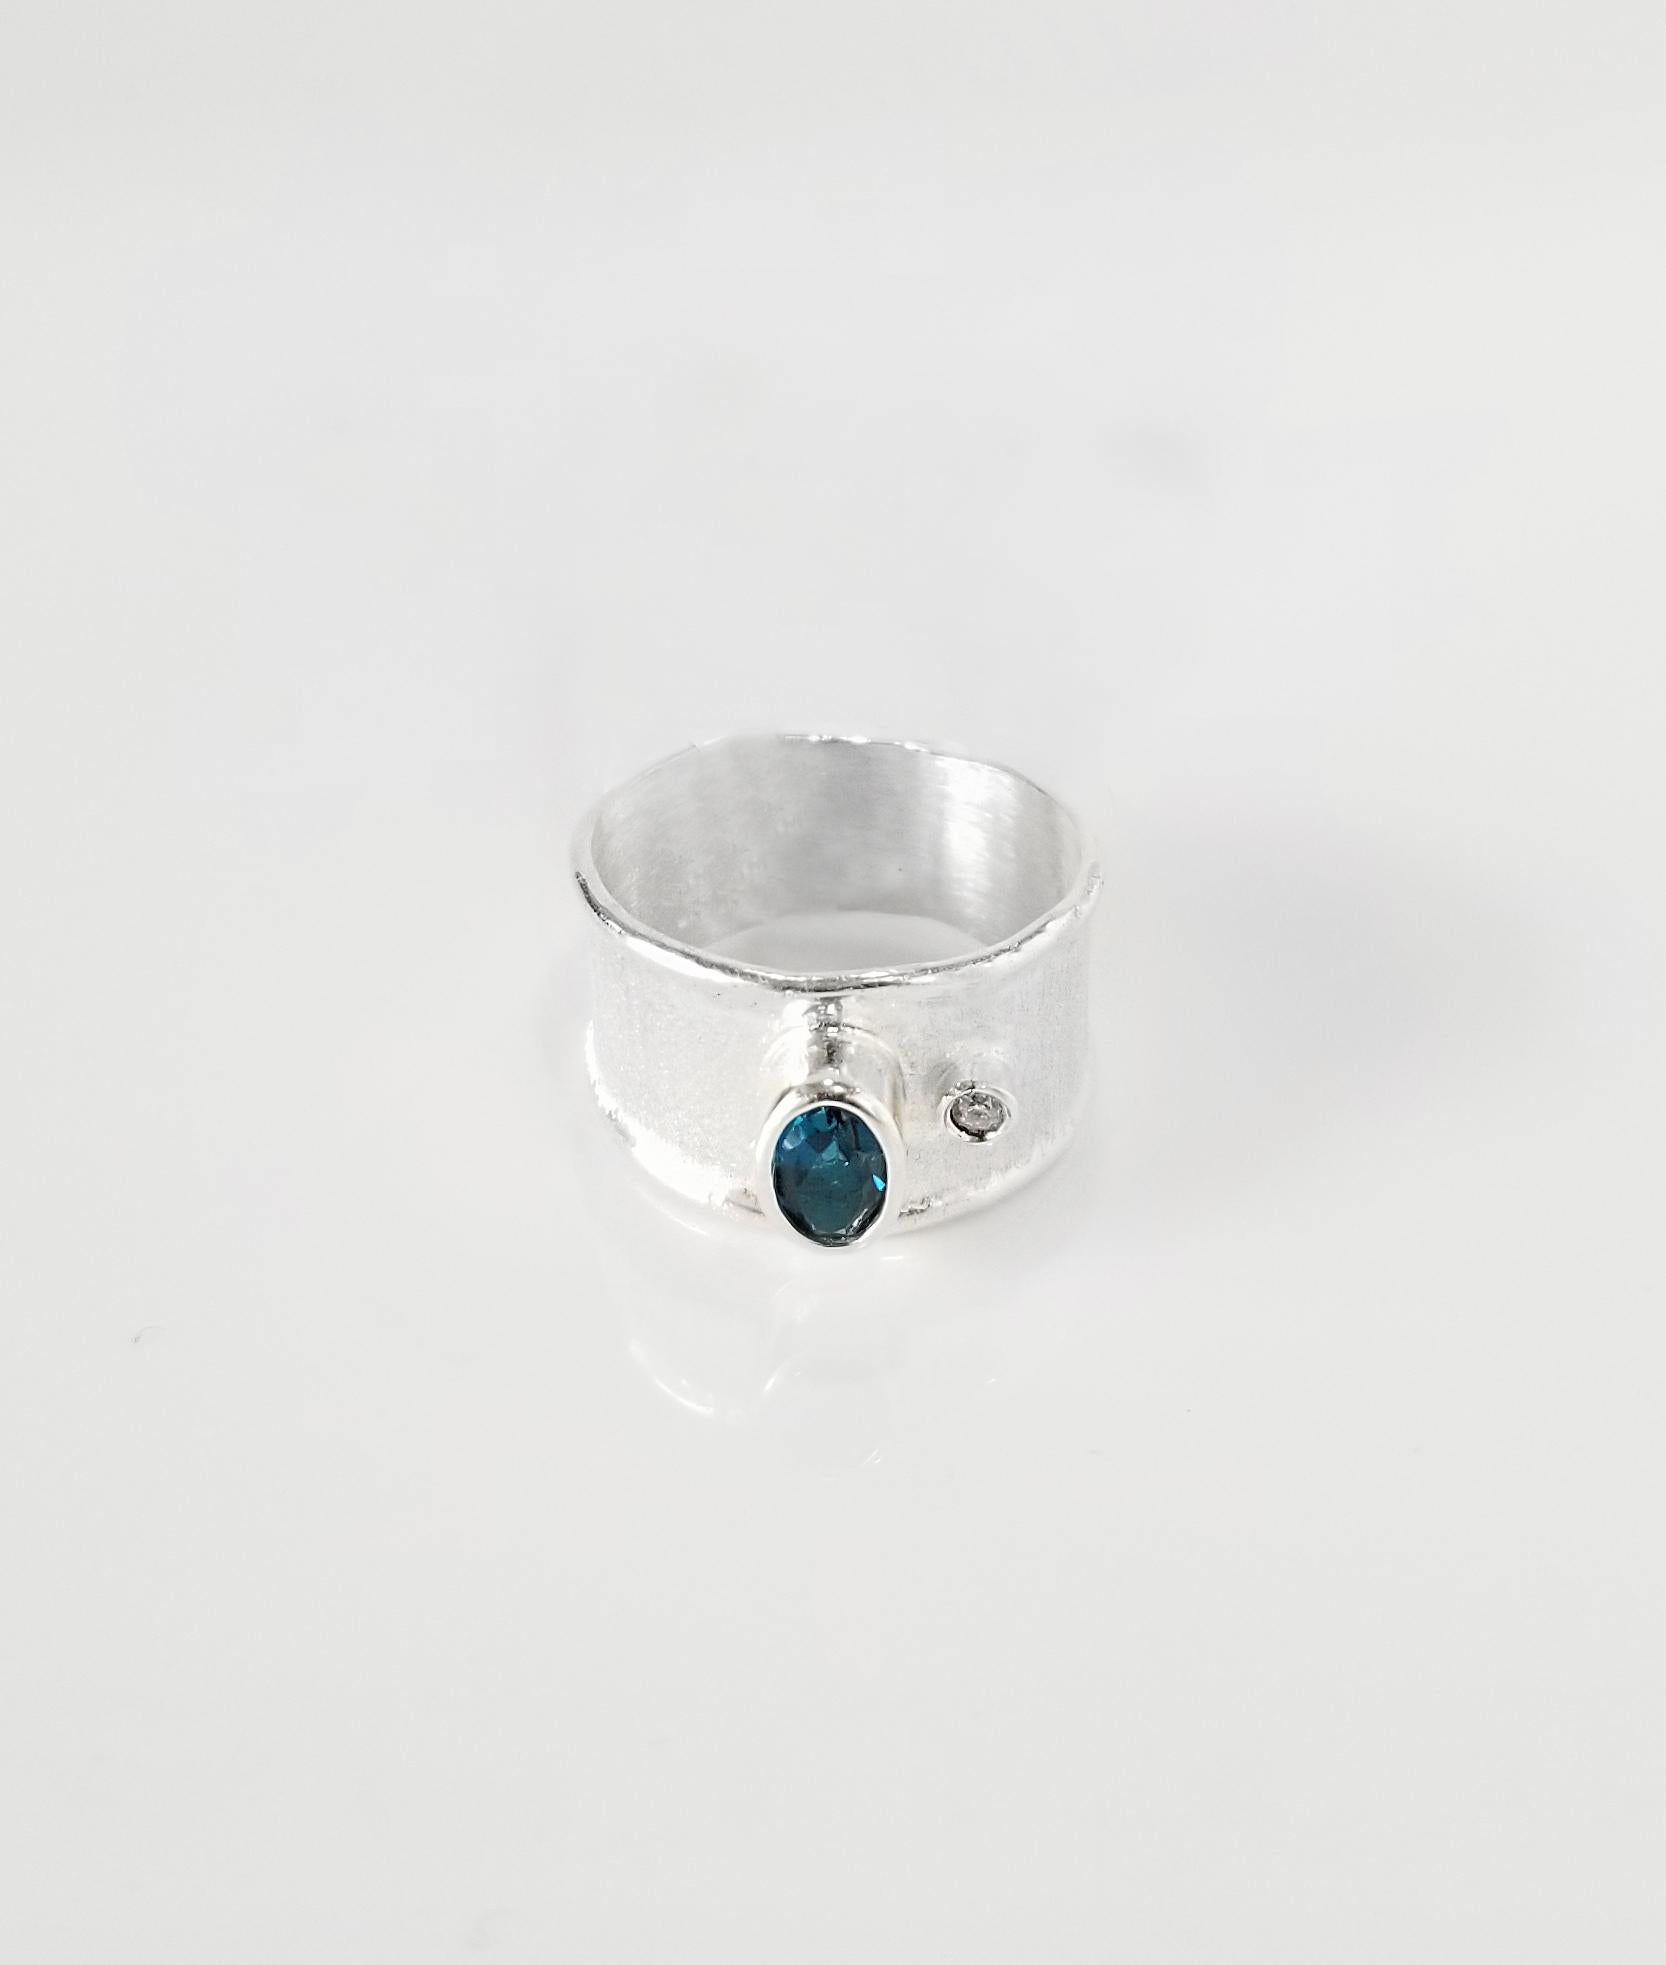 Yianni Creations Ammos Collection 100% Handmade Artisan Ring from Fine Silver featuring a 0.40 Carat London Blue Topaz accompanied by 0.03 Carat Brilliant Cut White Diamond complemented by unique techniques of craftsmanship - brushed texture and